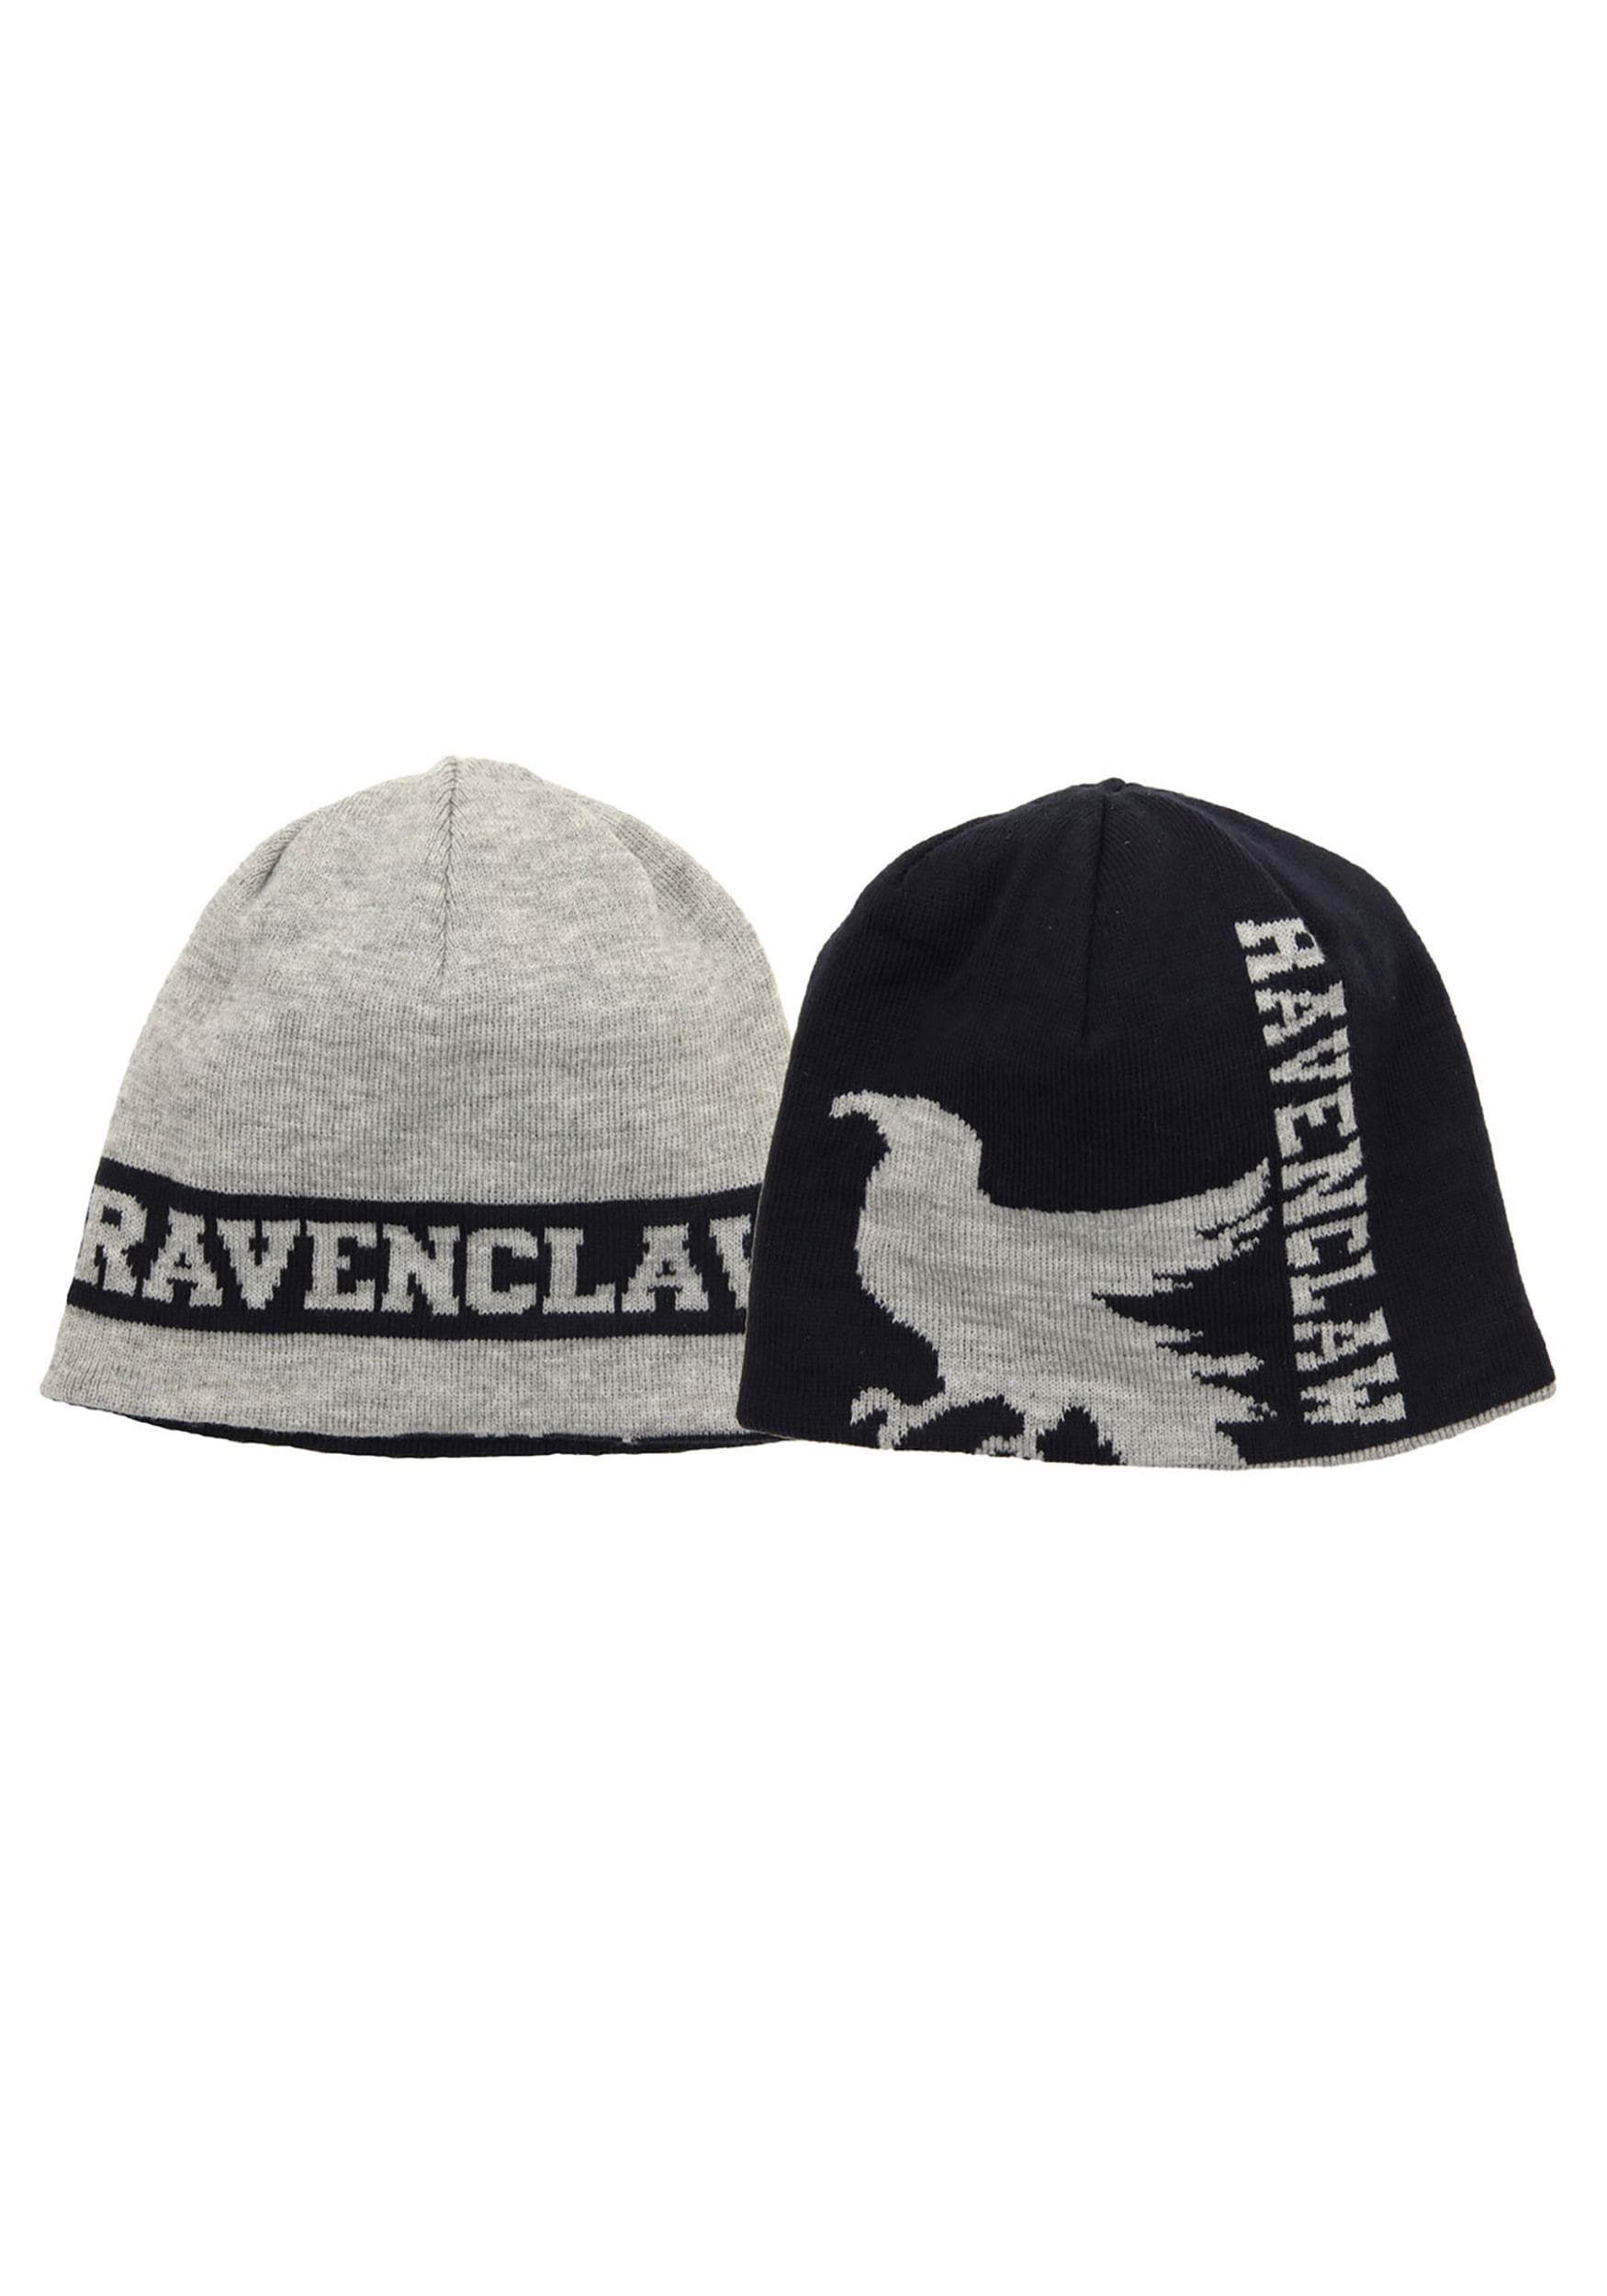 Ravenclaw Reversible Knit Gray Beanie , Harry Potter Hats